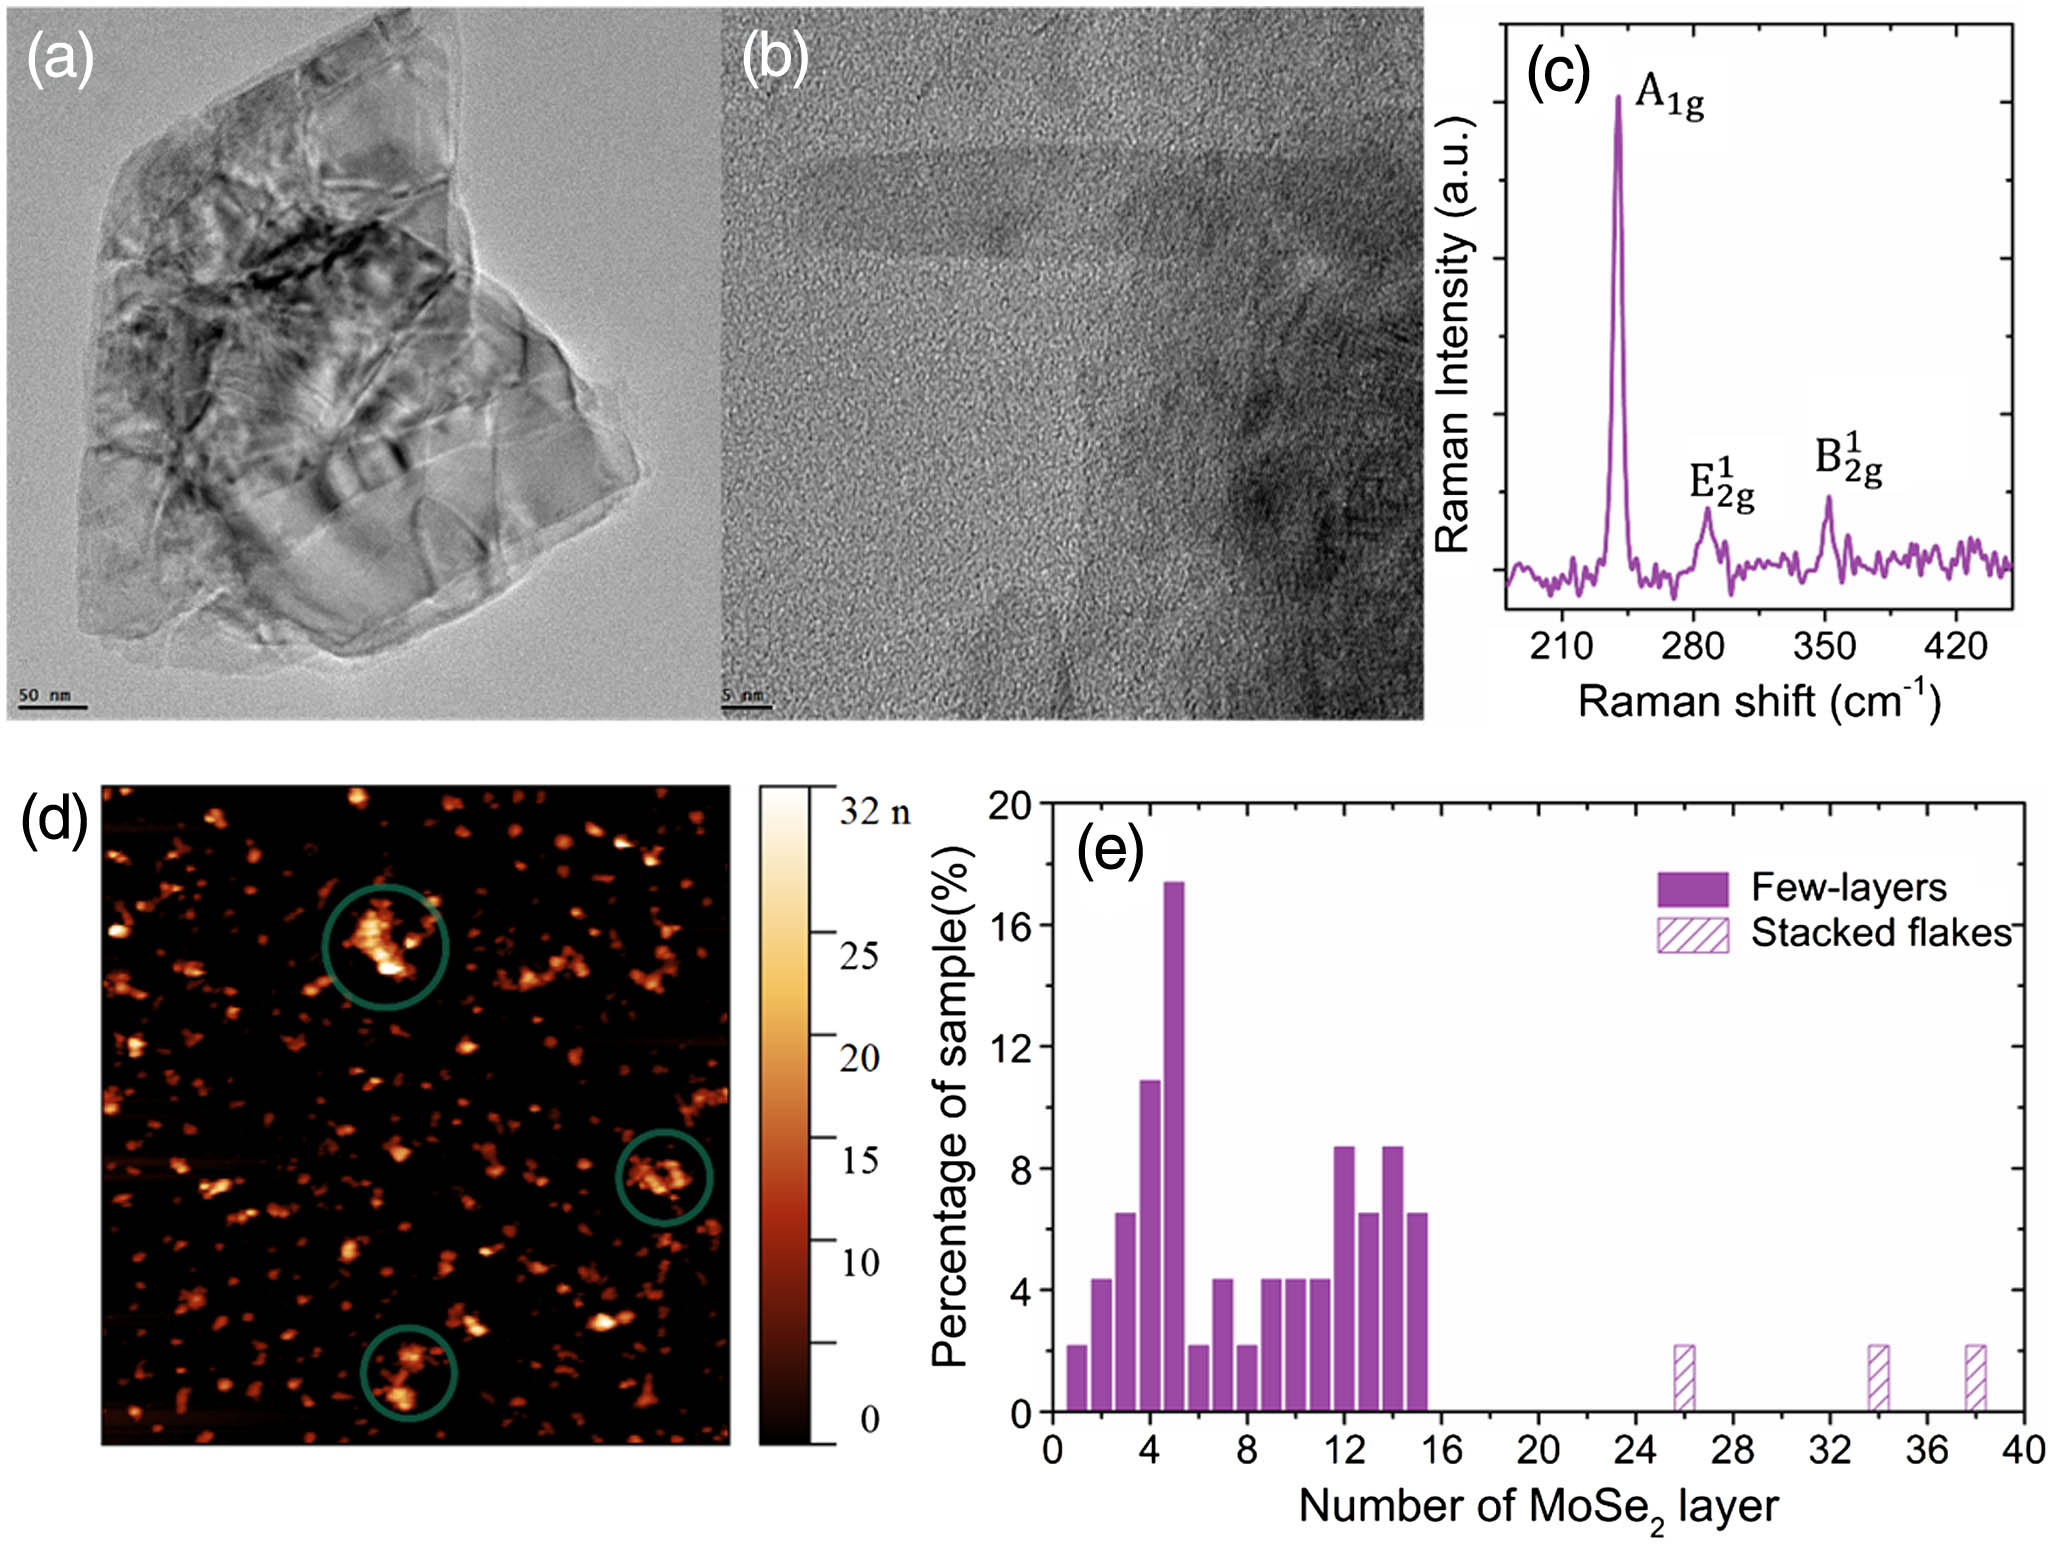 TEM images showing (a) a few-layer MoSe2 flake and (b) a monolayer MoSe2 flake. The scale bar is 50 nm in (a) and 5 nm in (b). (c) Raman spectrum of the few-layer MoSe2 flakes. (d) AFM image displaying the thickness of a large number of MoSe2 flakes in a ∼5 μm×5 μm area. (e) Statistical thickness distribution of the MoSe2 flakes in as-prepared dispersions.